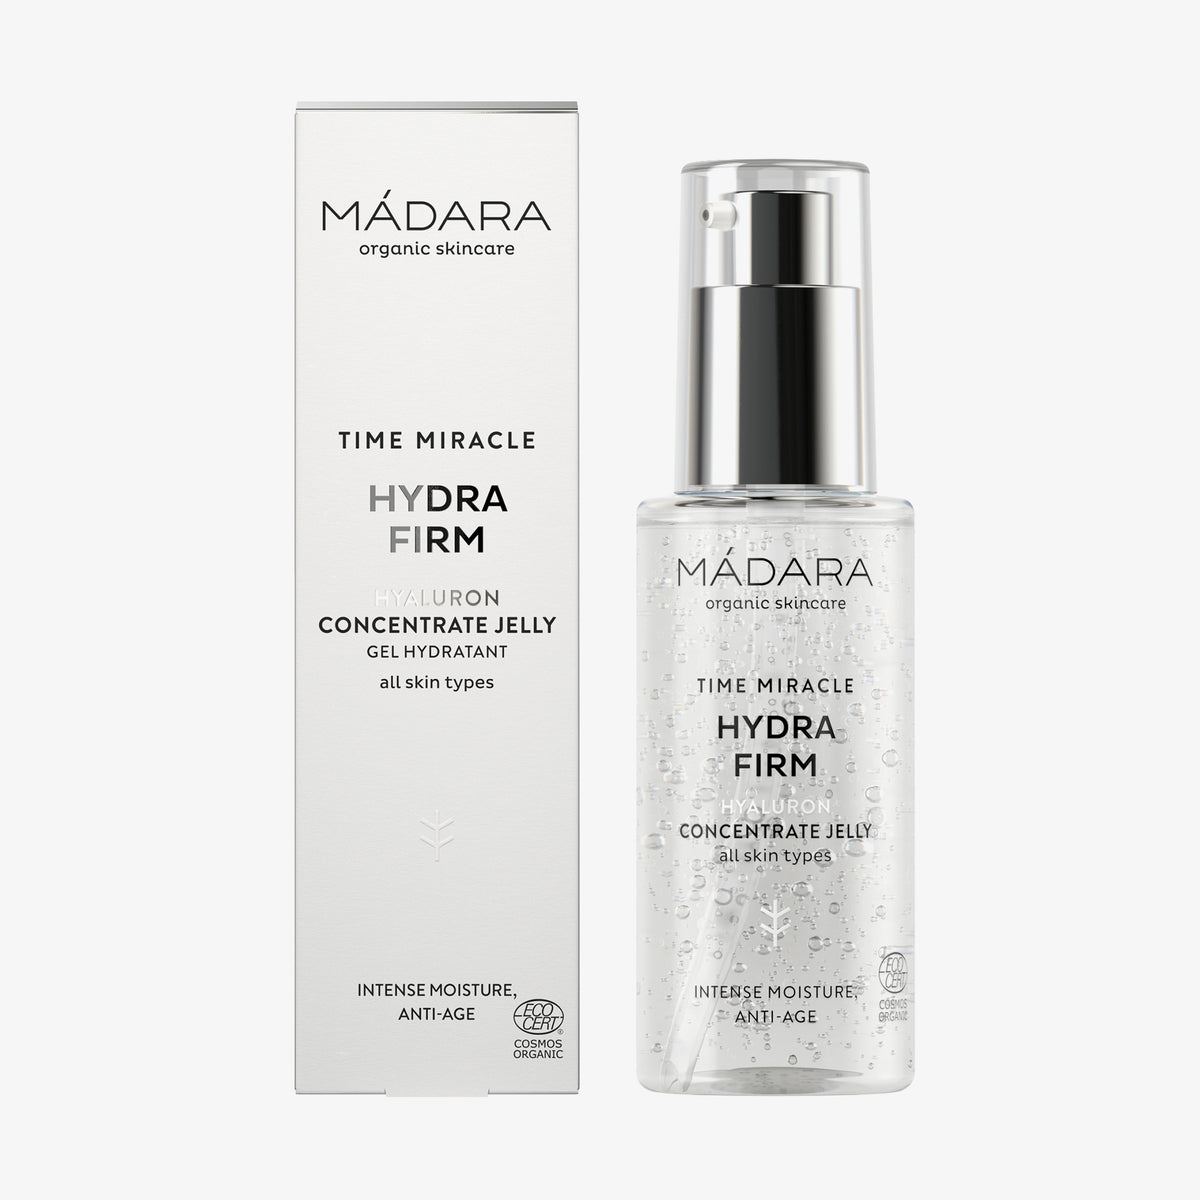 Time Miracle Hydra Firm Hyaluron Concentrate Jelly